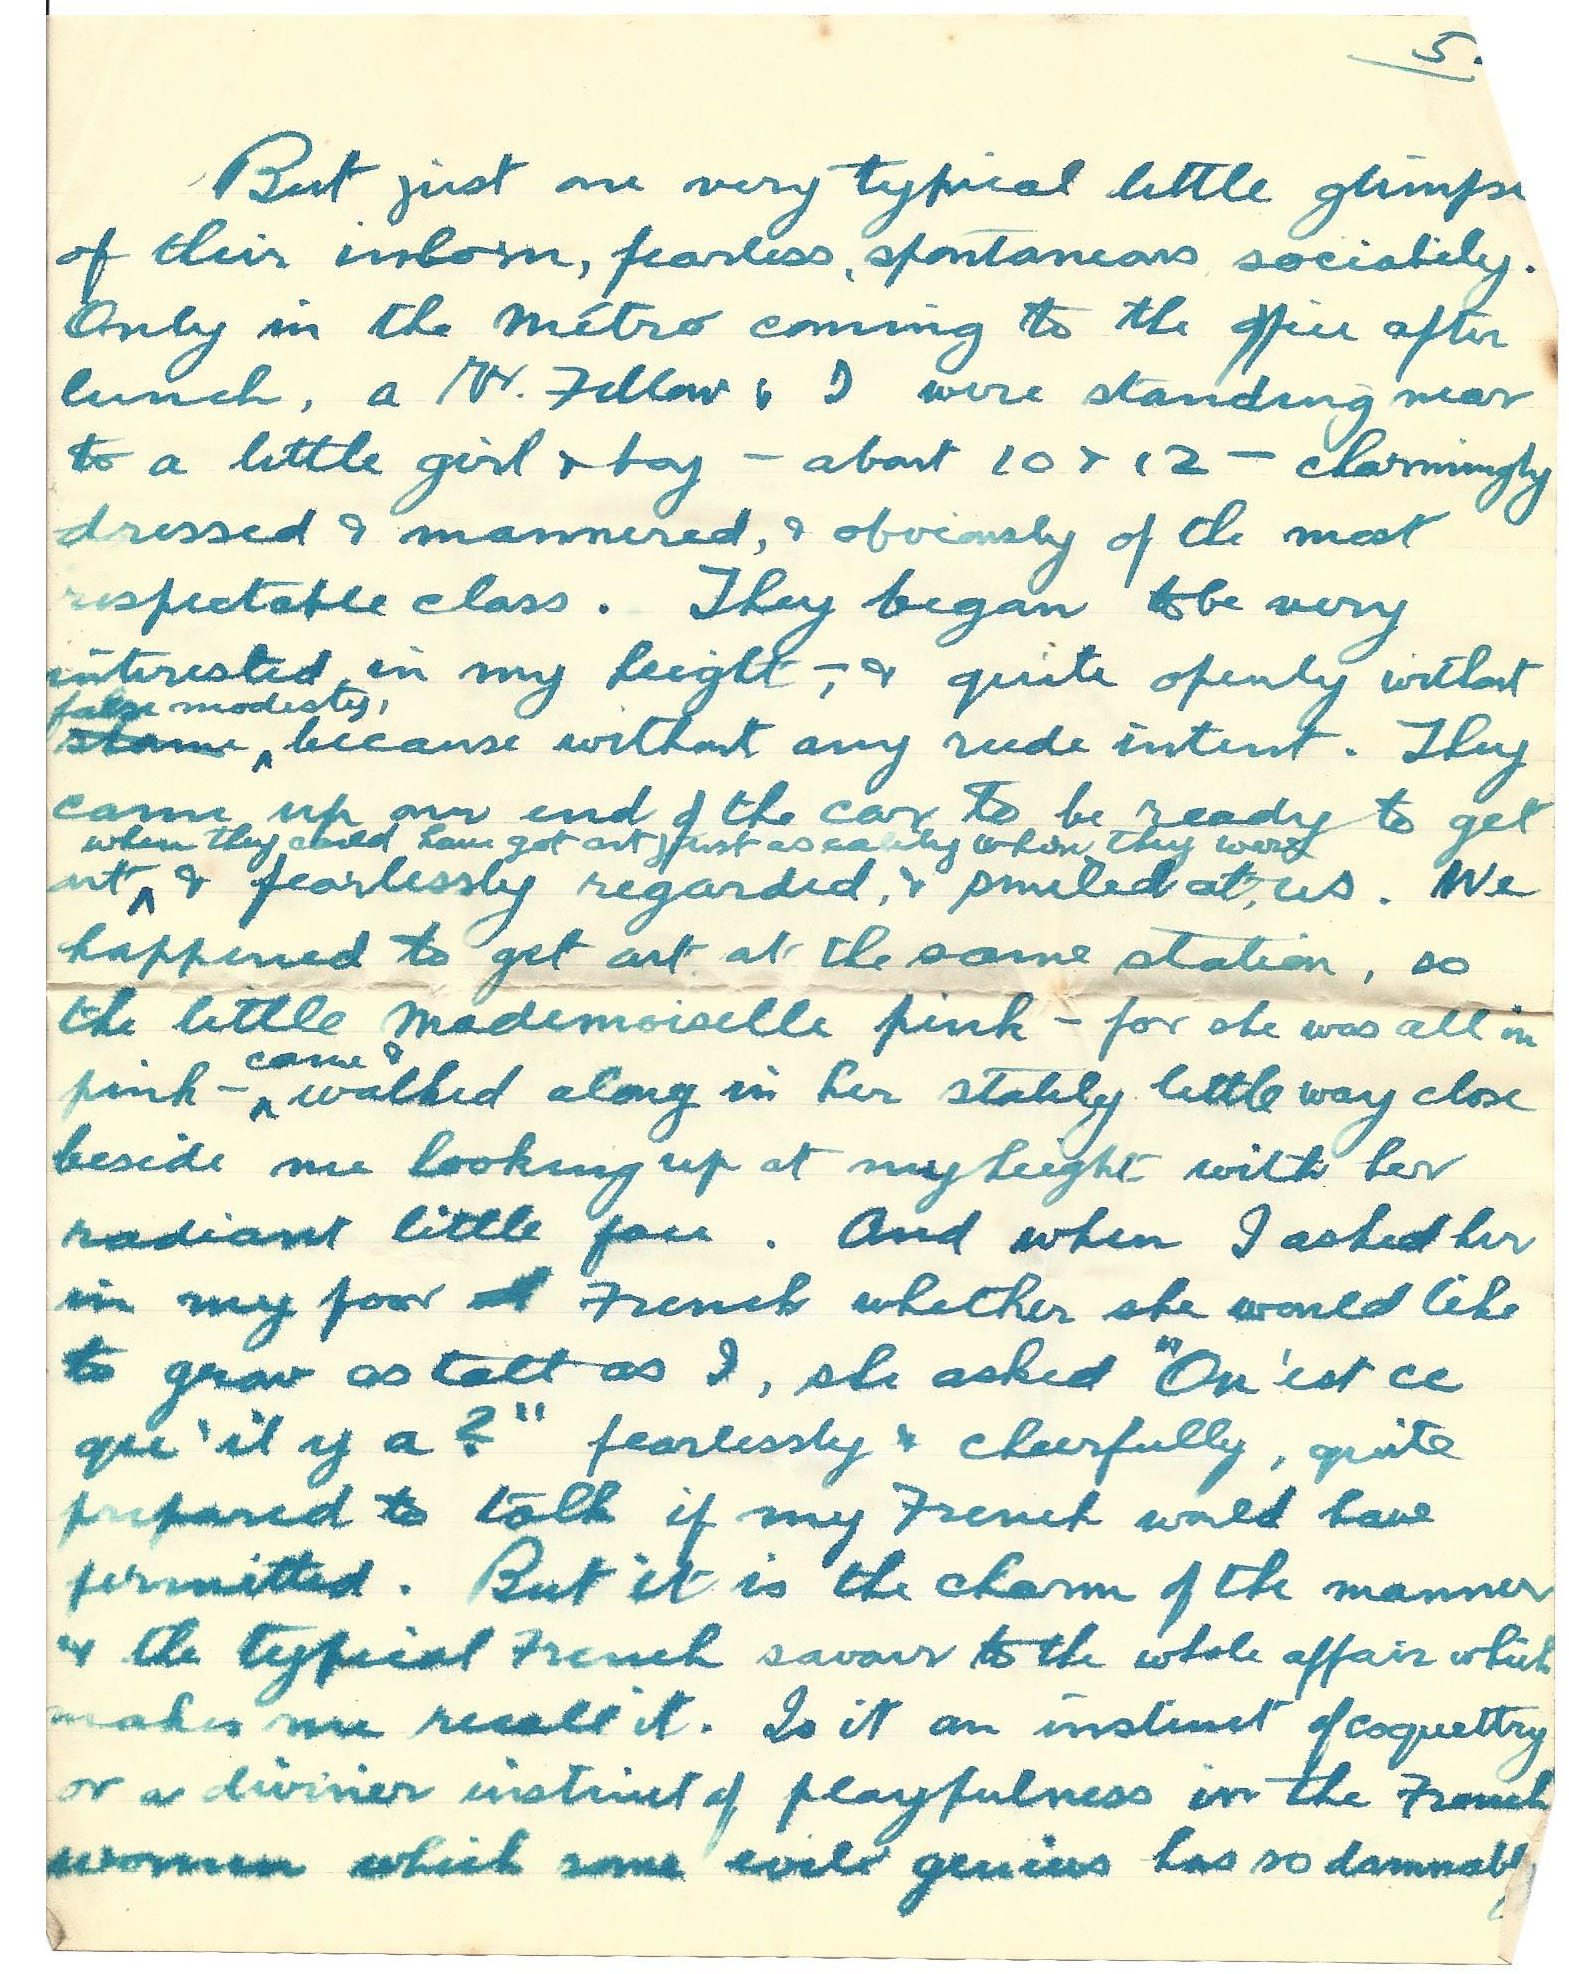 1919-08-19 p5 Donald Bearman letter to his father